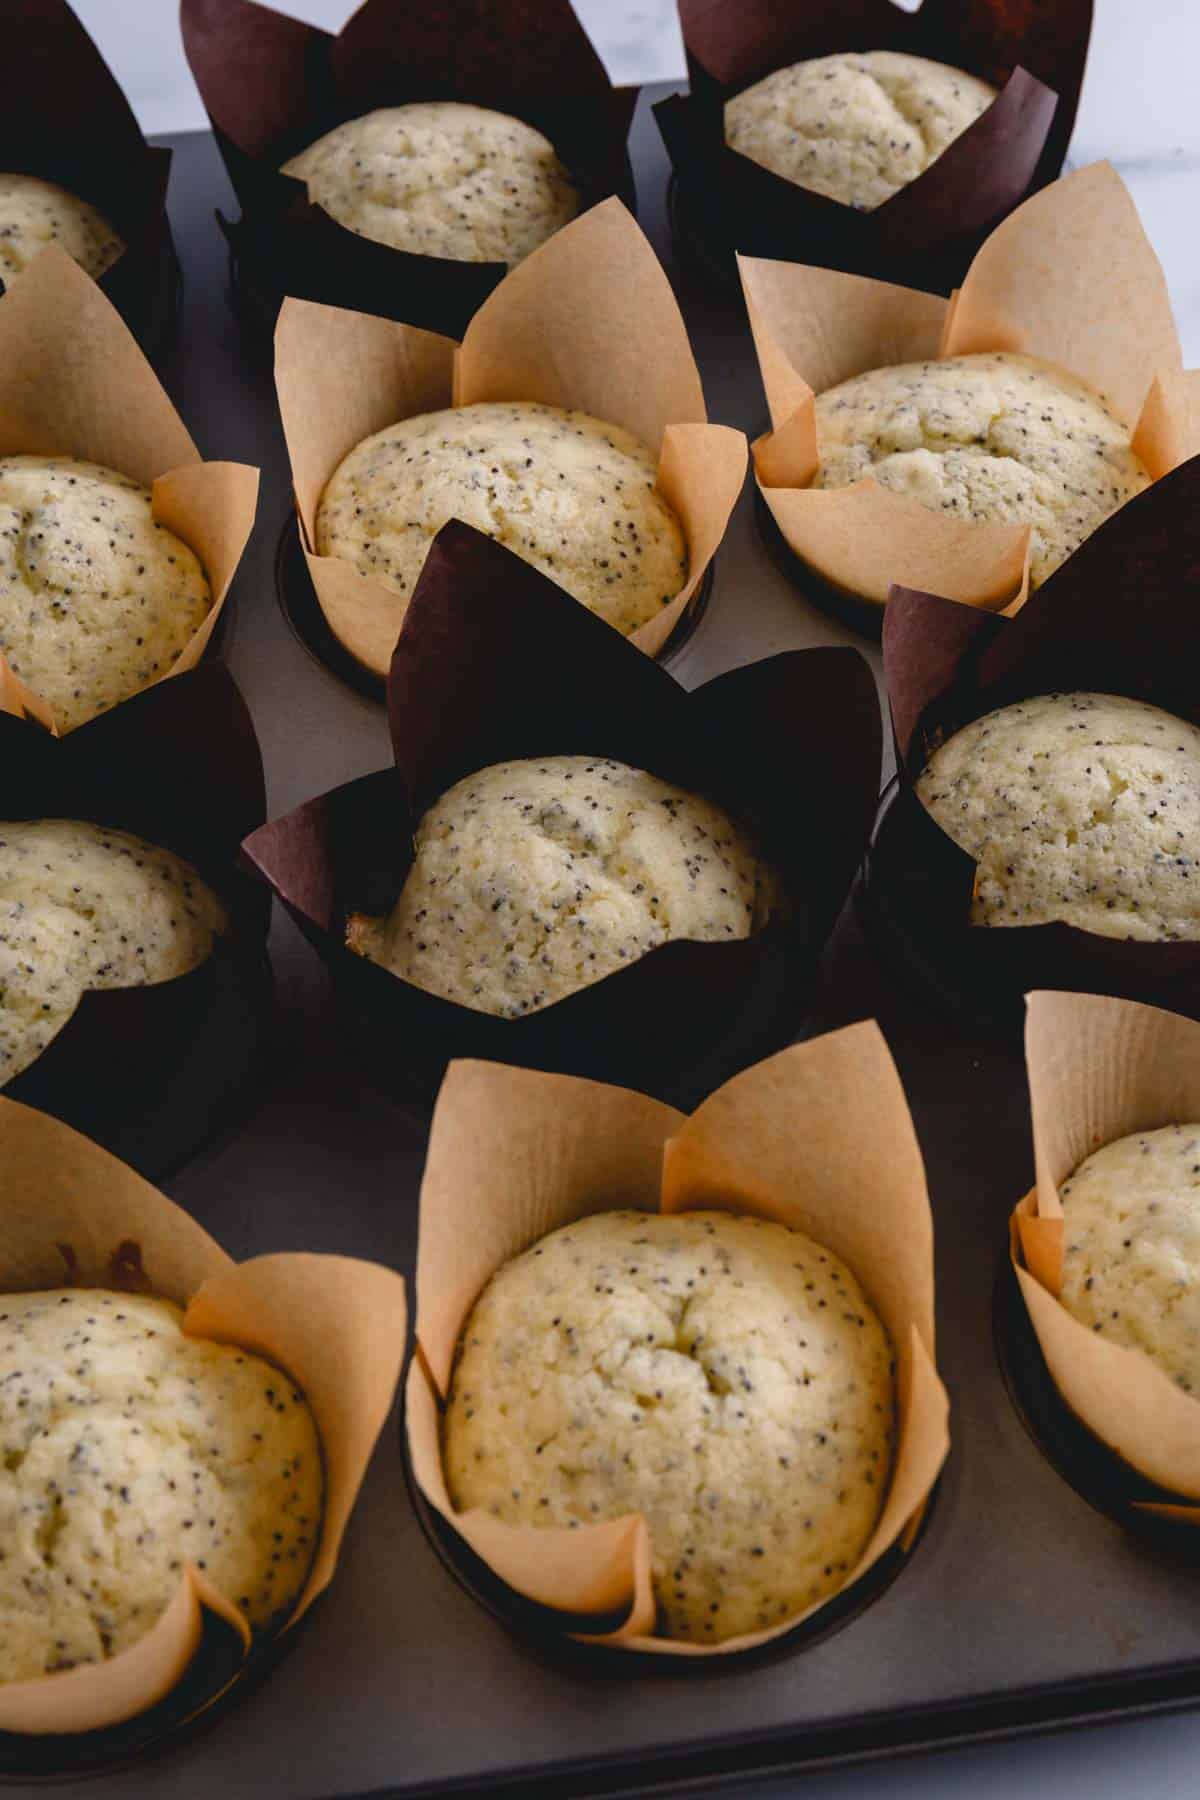 Baked lemon poppy seed muffins in a muffin tin.